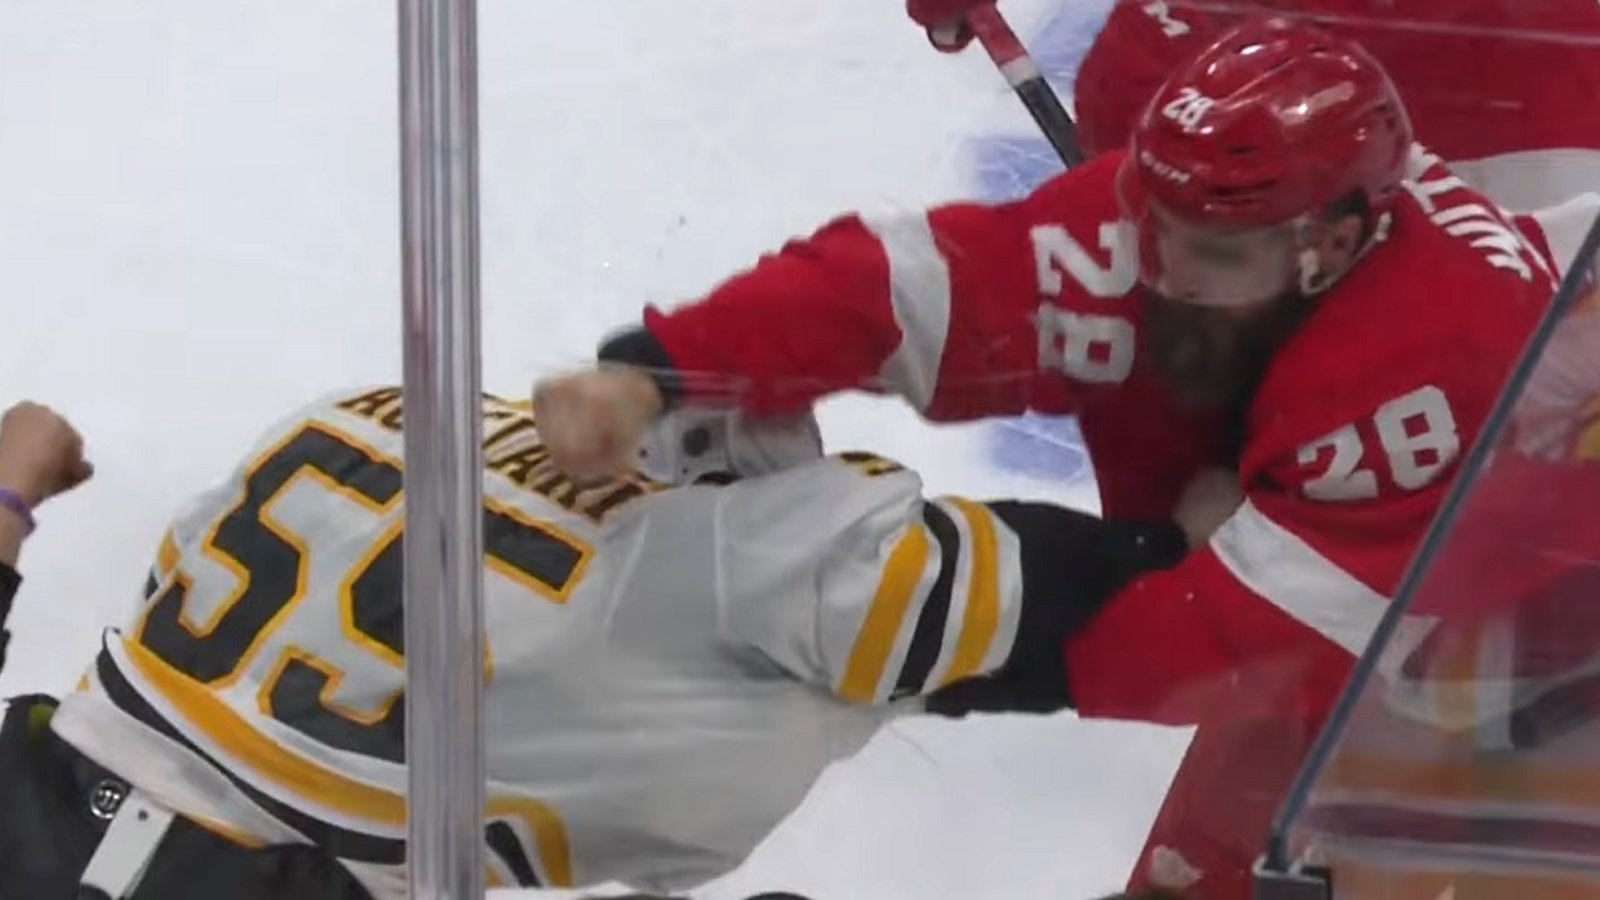 Luke Witkowski crushes Nordstrom with a monster hit, then destroys Acciari with his fists.